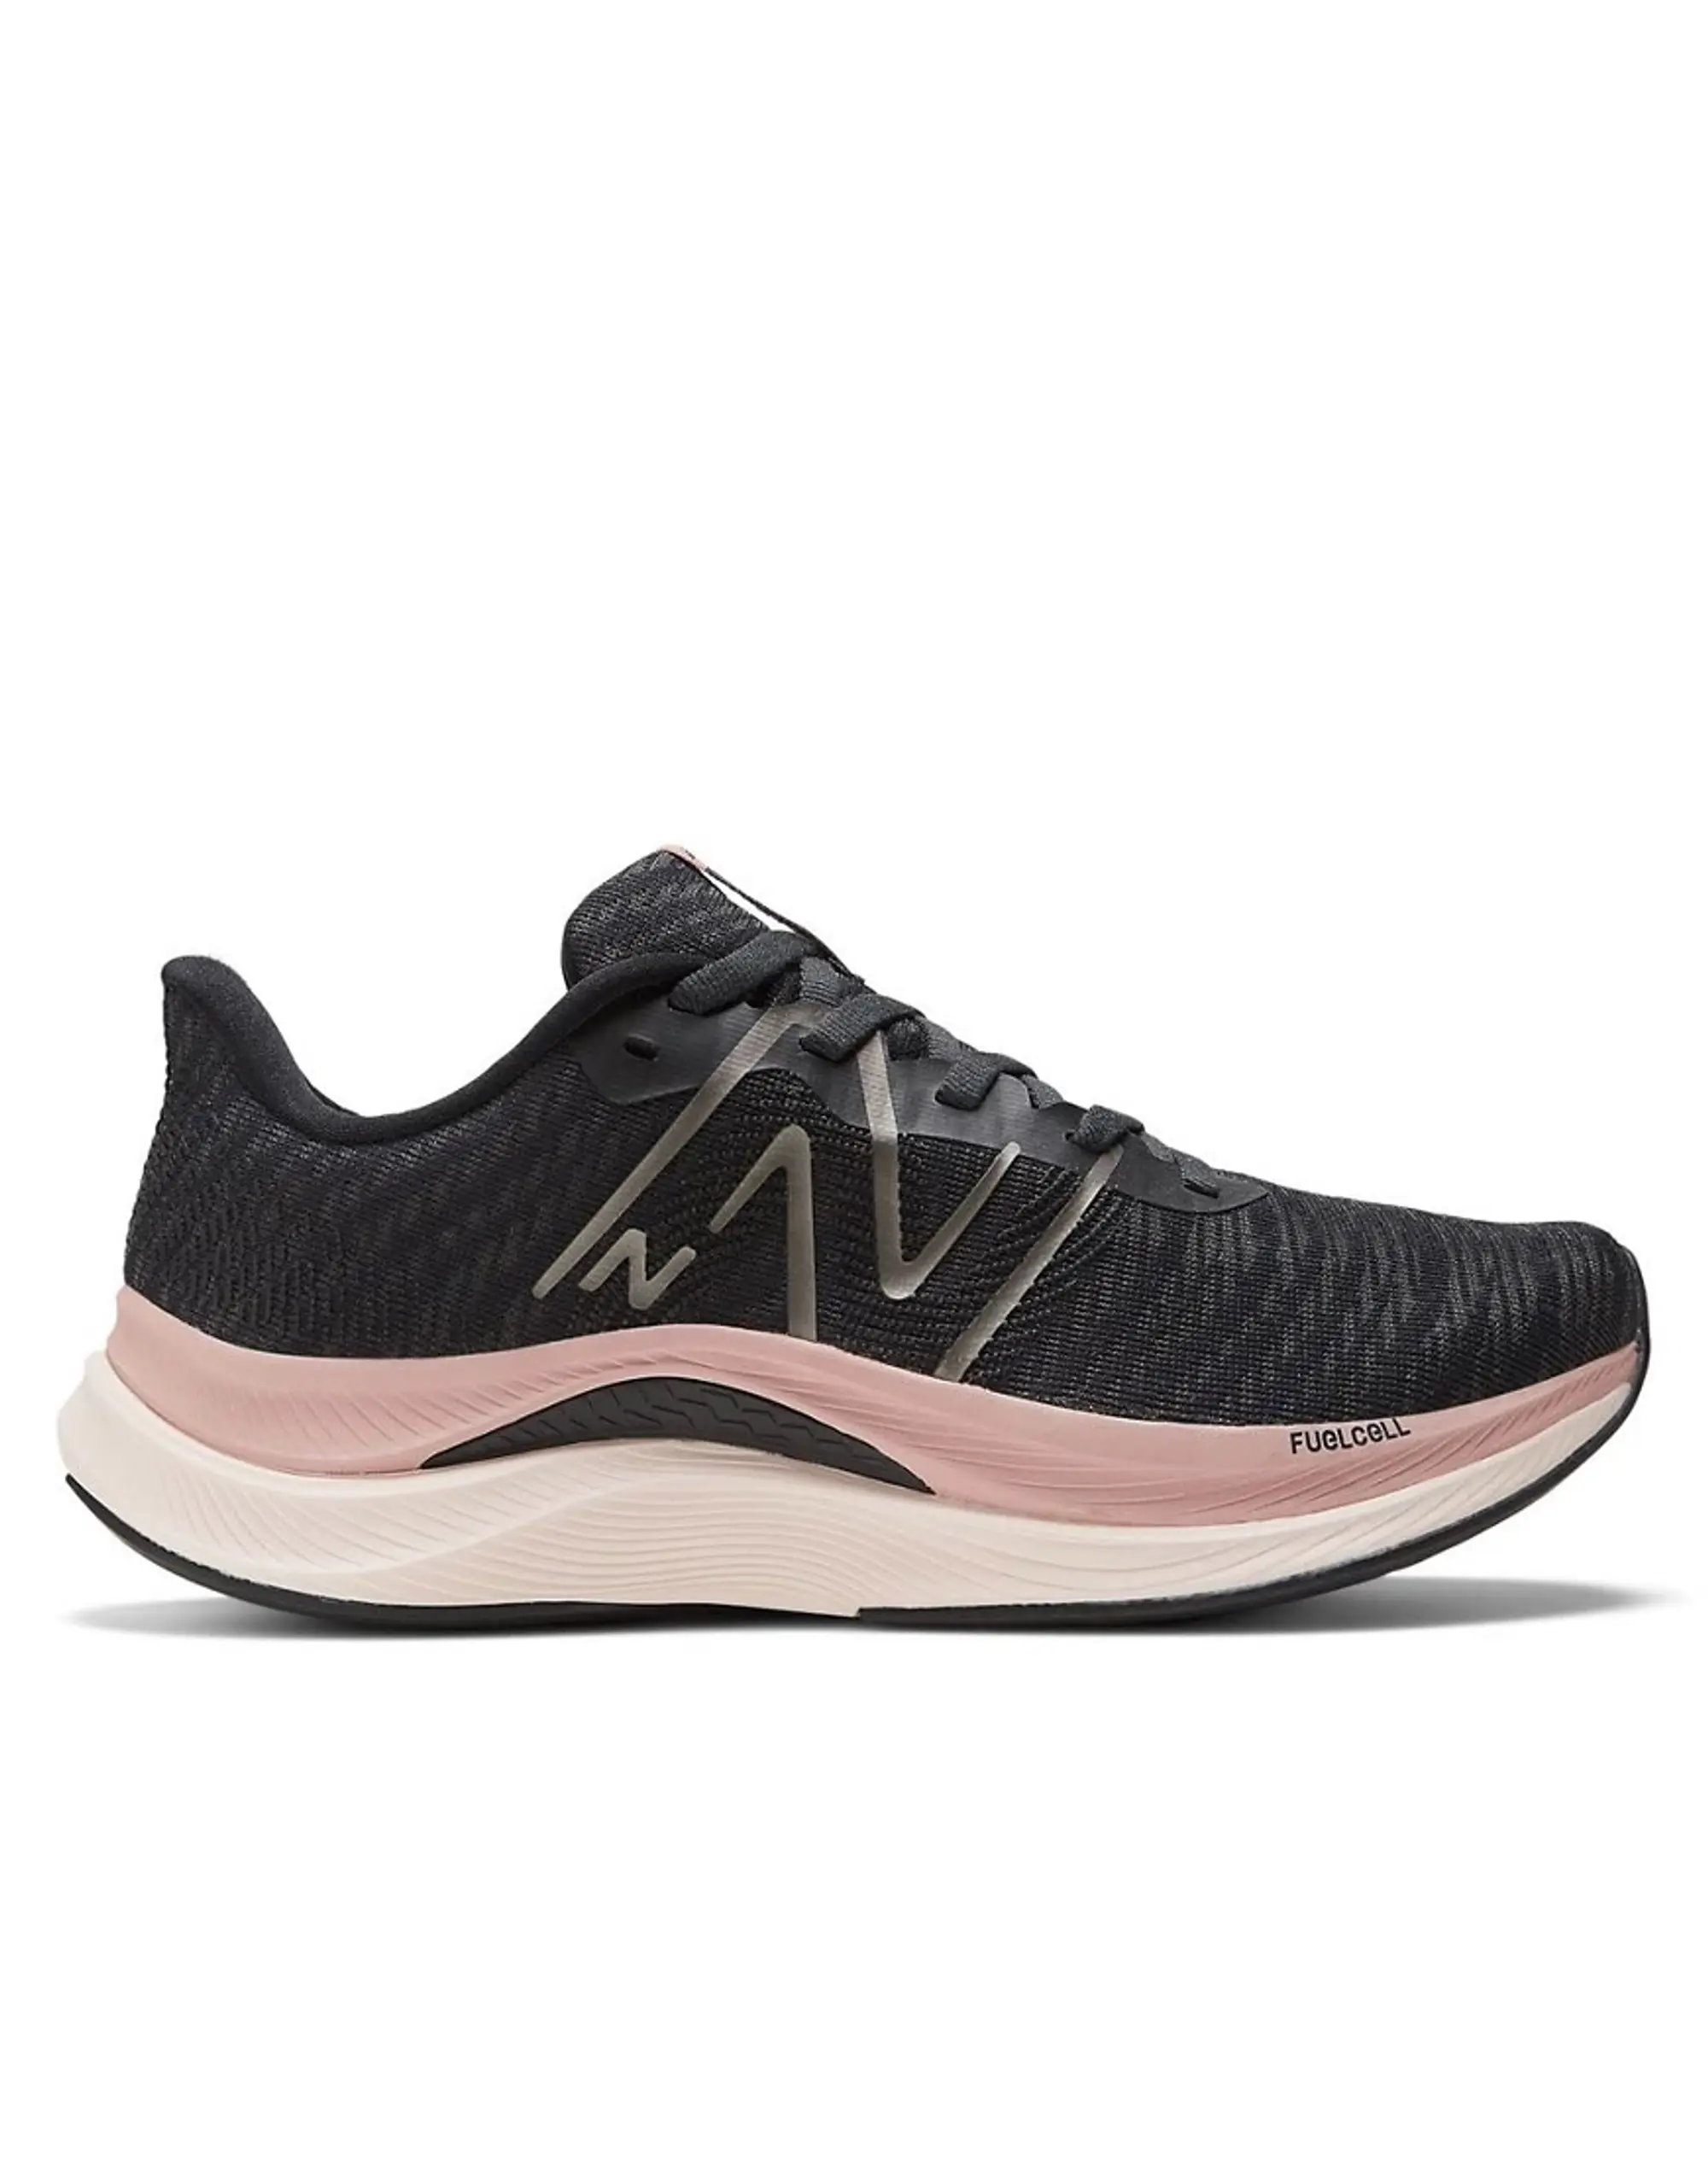 New Balance Womens Running Fuelcell Propel V4 Trainers - Black, Black